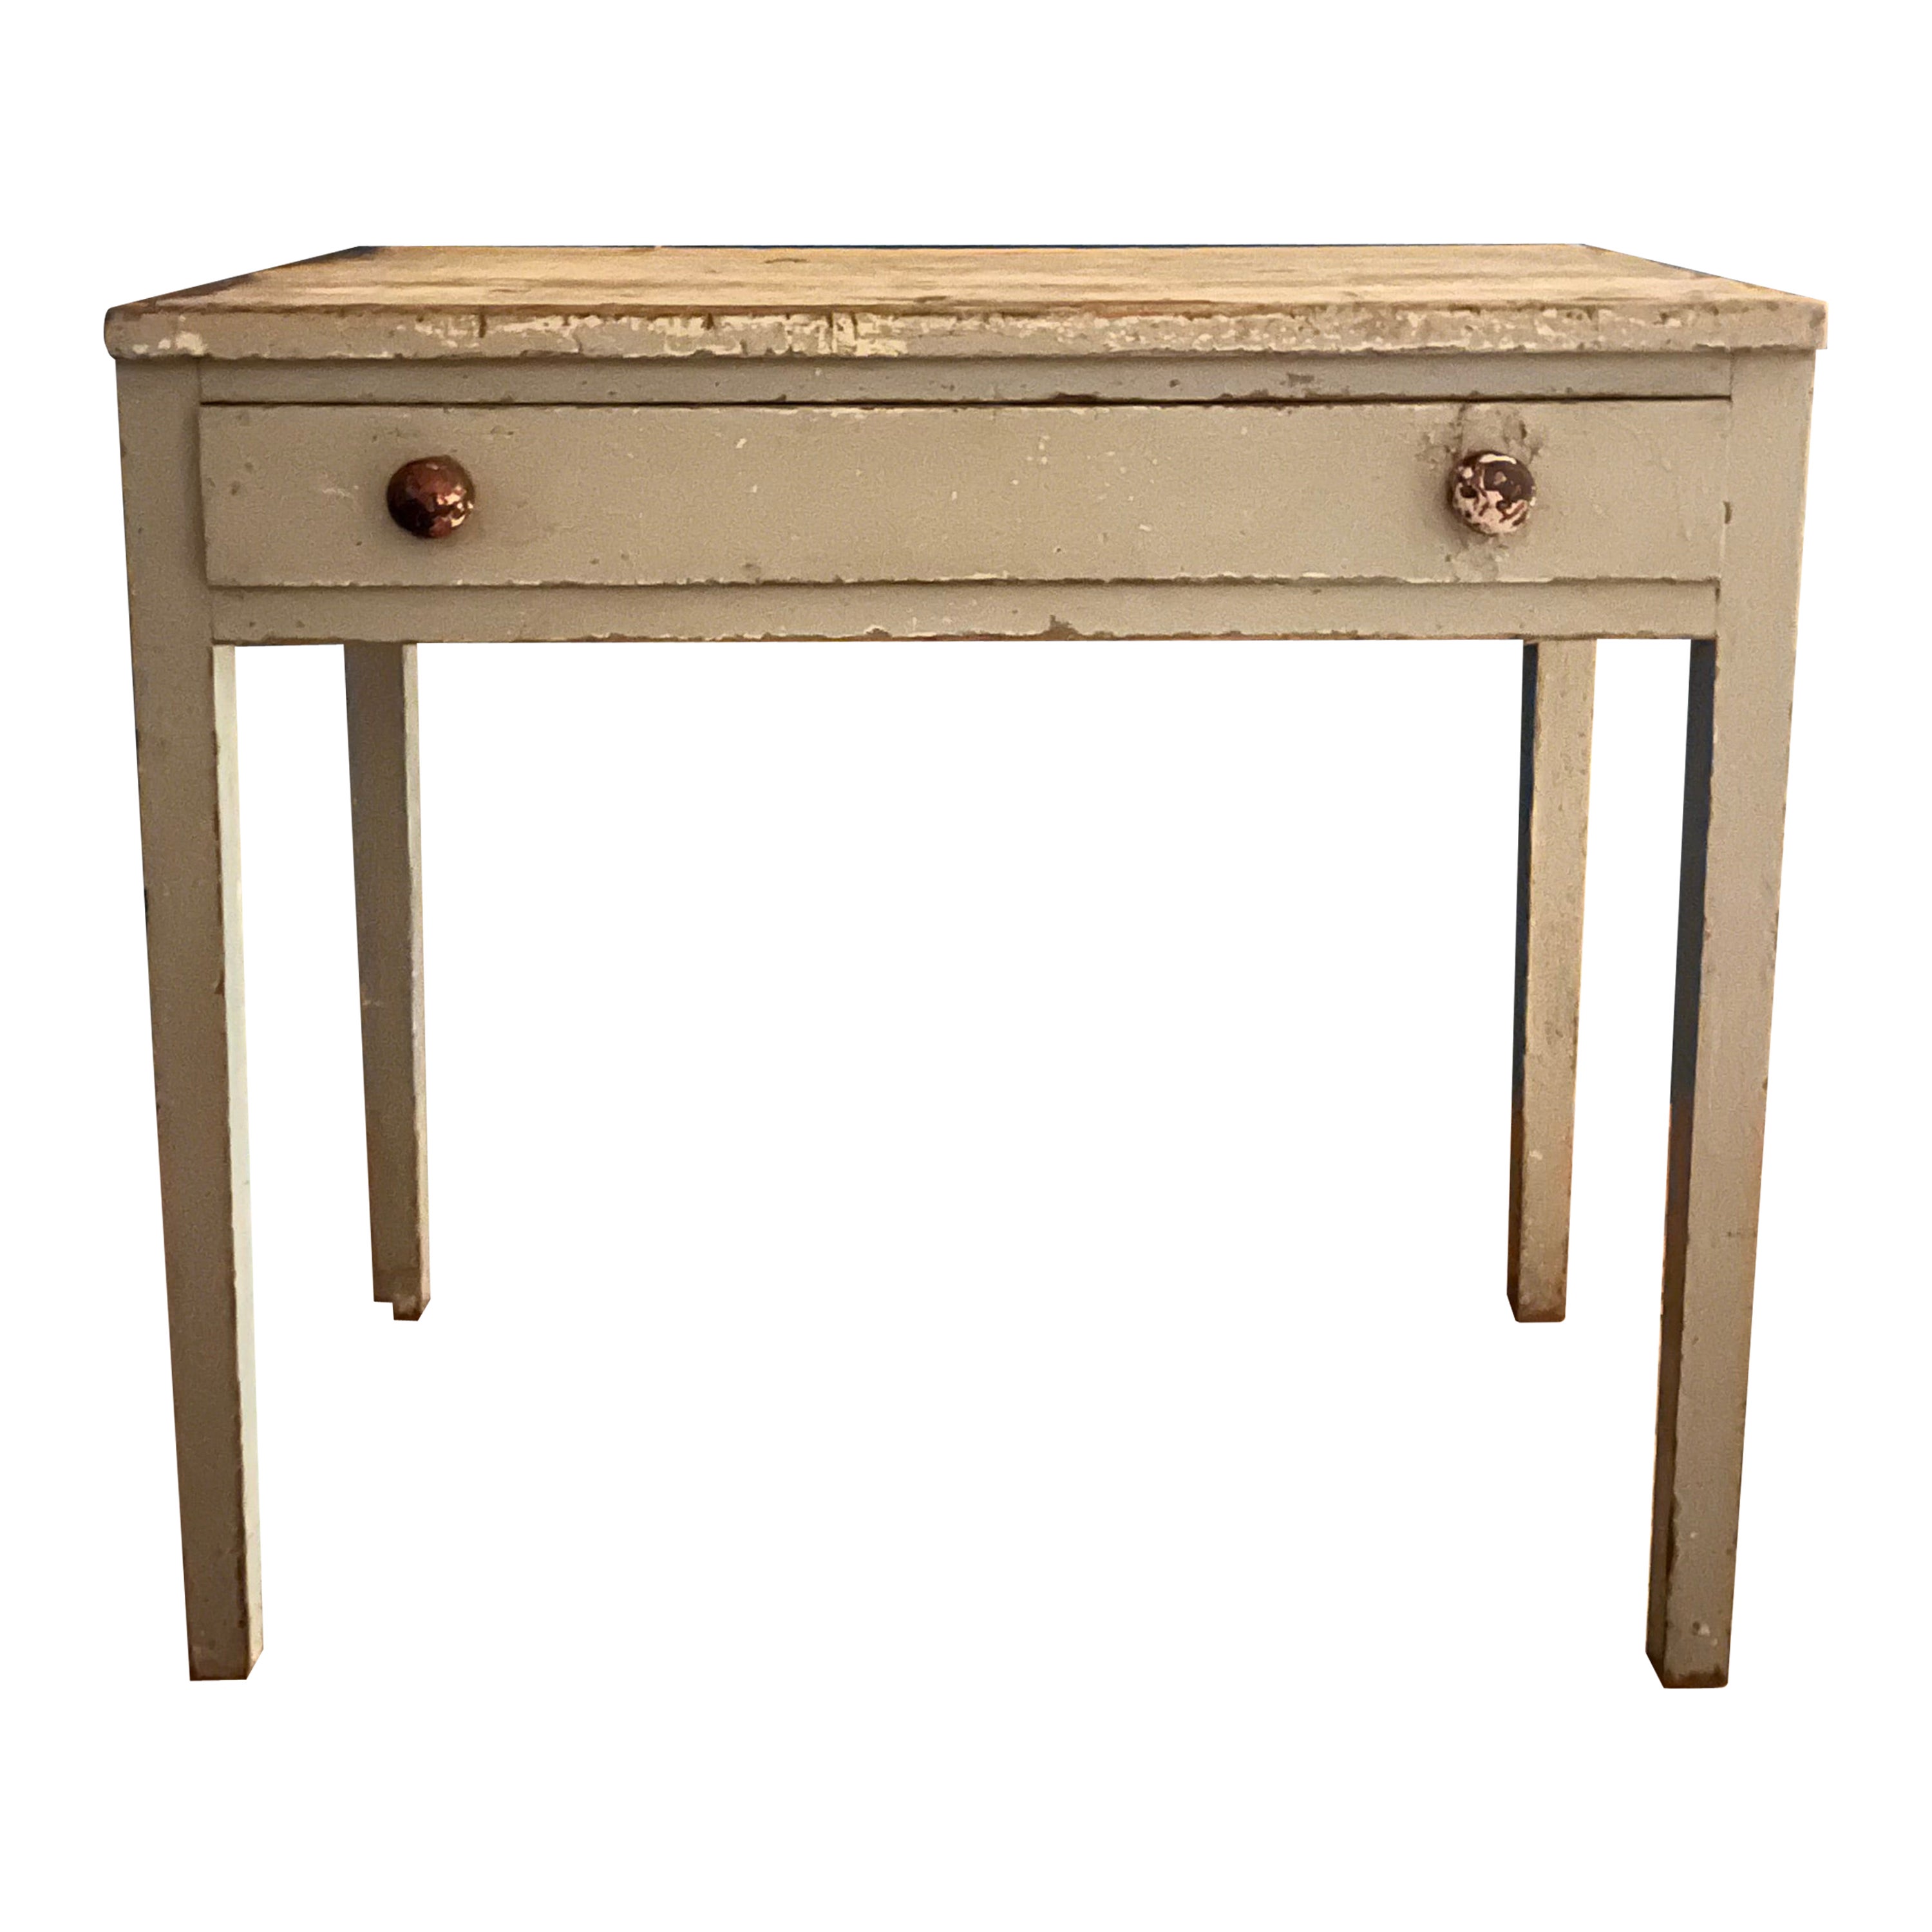 This French farmhouse painted distressed desk, dates back to the 1920's and exudes French provincial charm. It was sourced from the Loire Valley in France, most likely estate crafted. The distressed finish adds character to the piece and gives it a